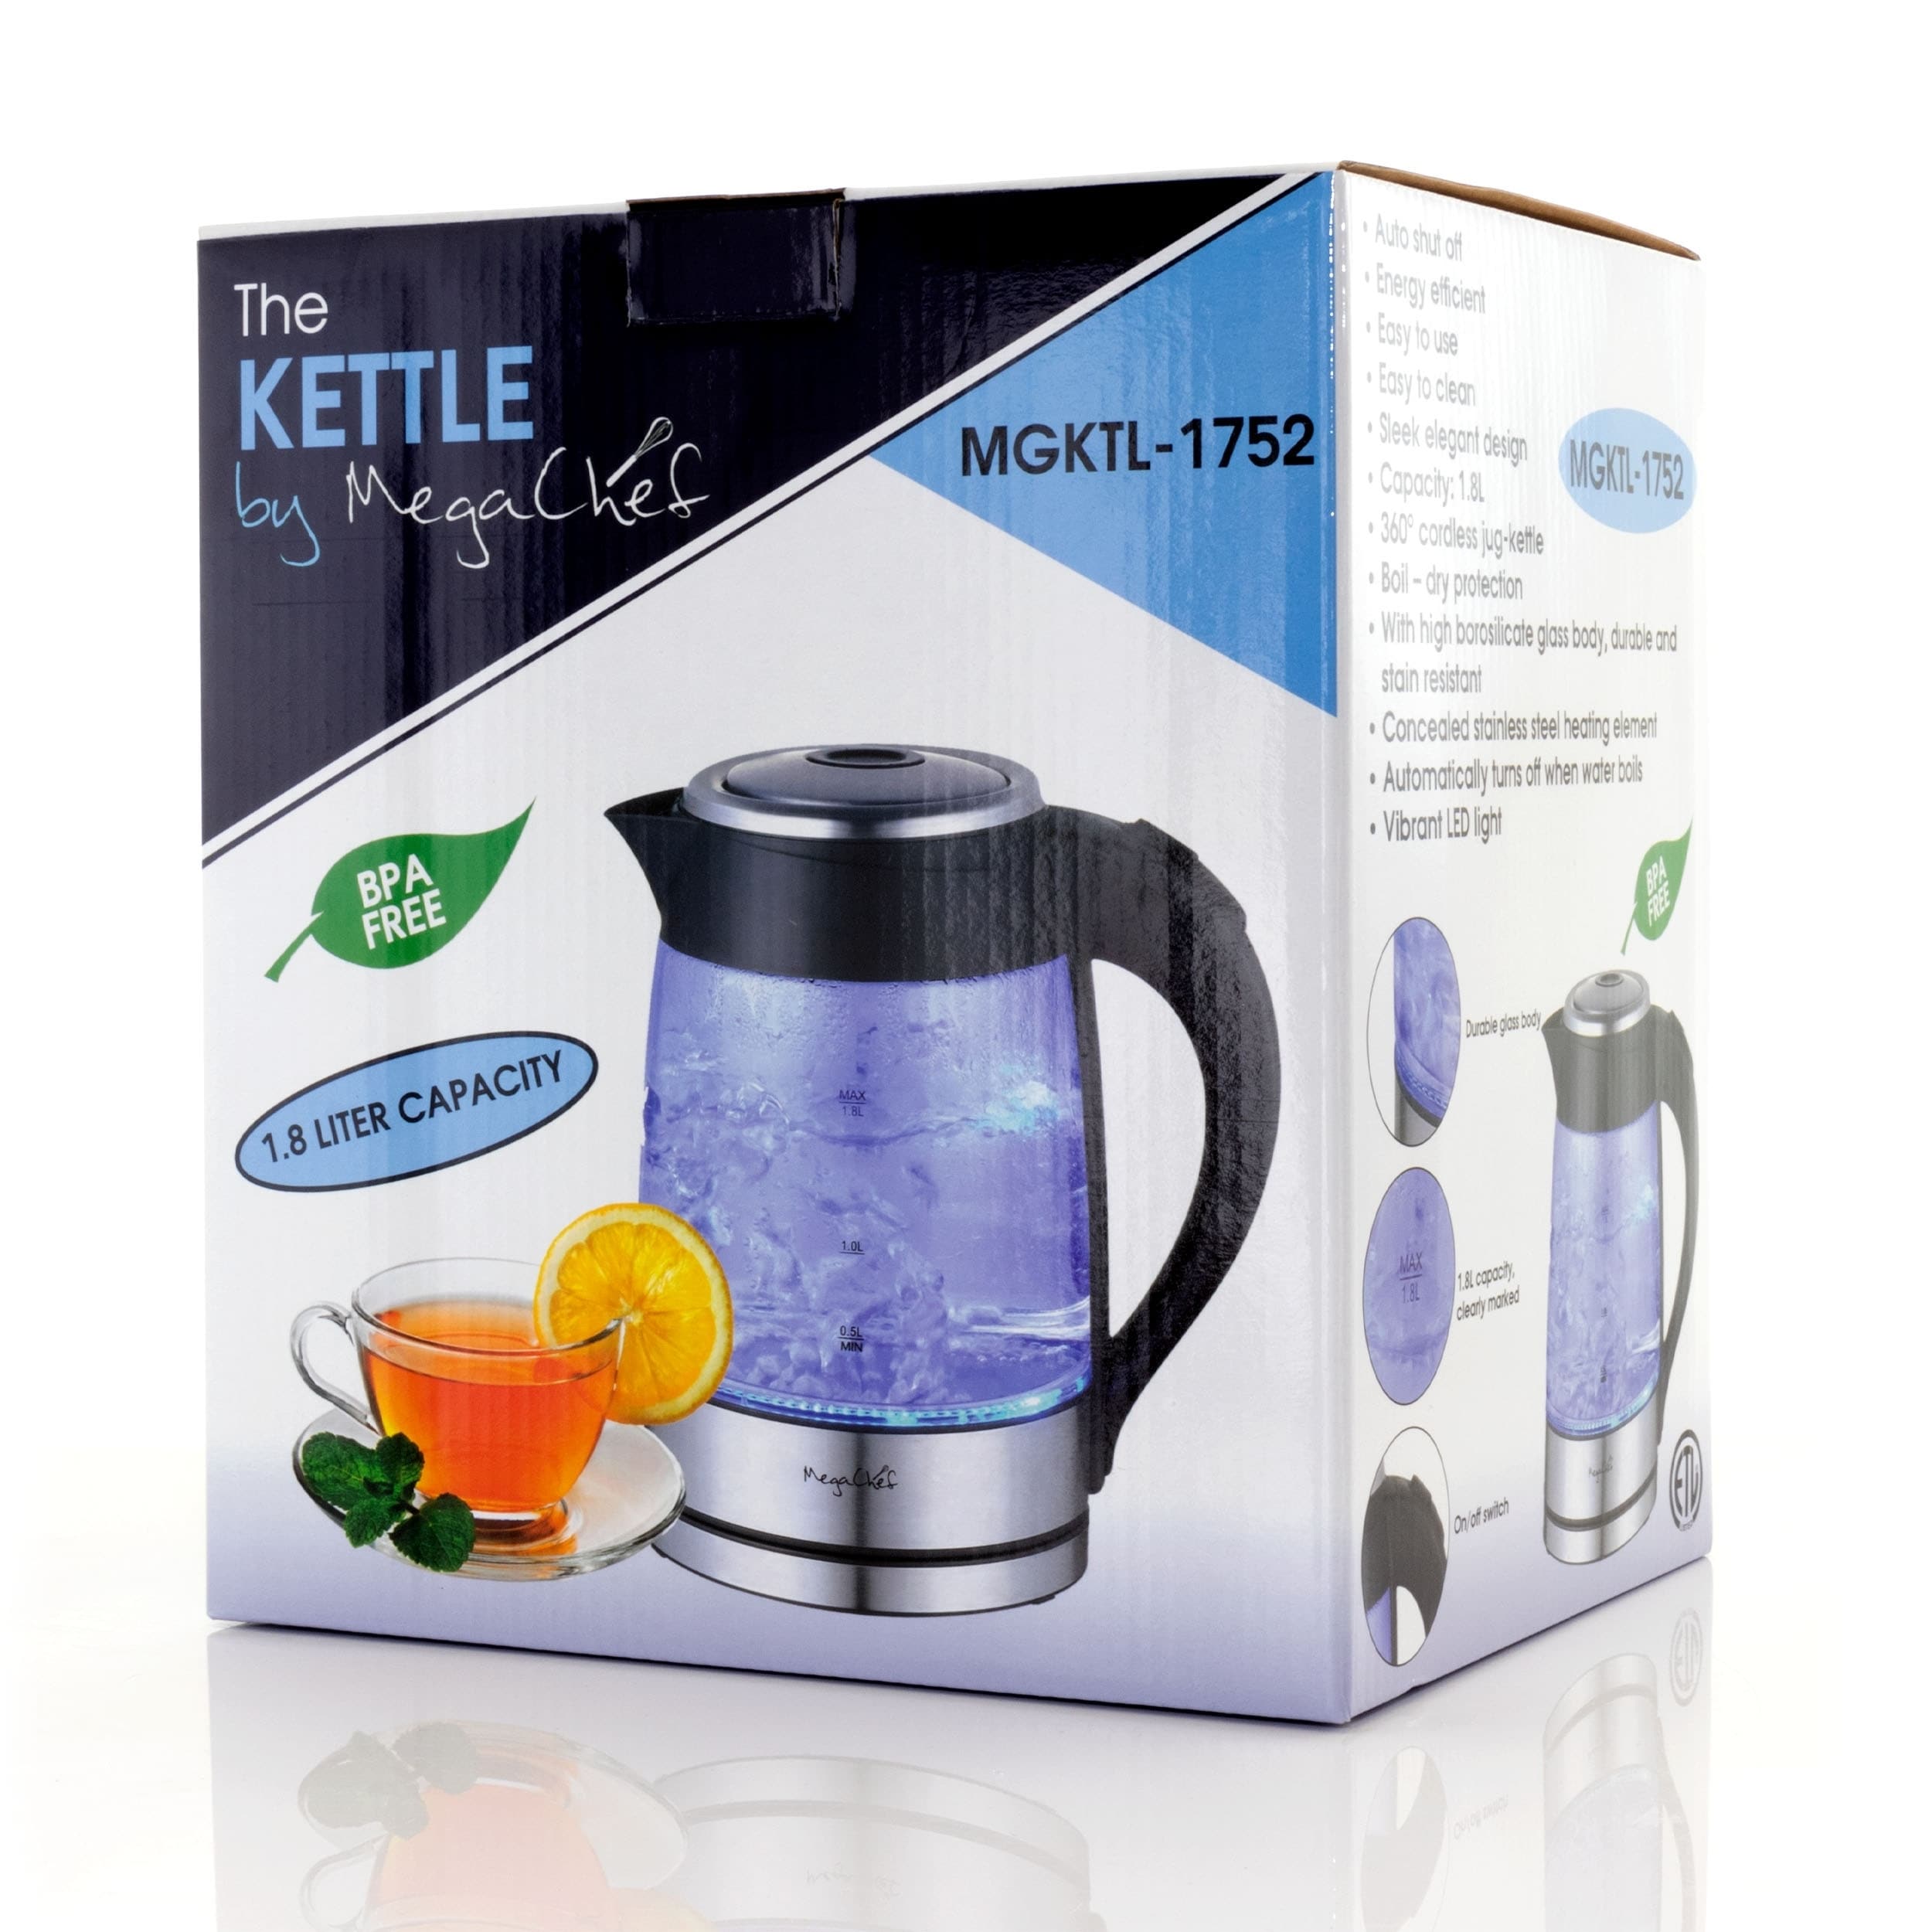 MegaChef 1.7Lt. Glass and Stainless Steel Electric Tea Kettle